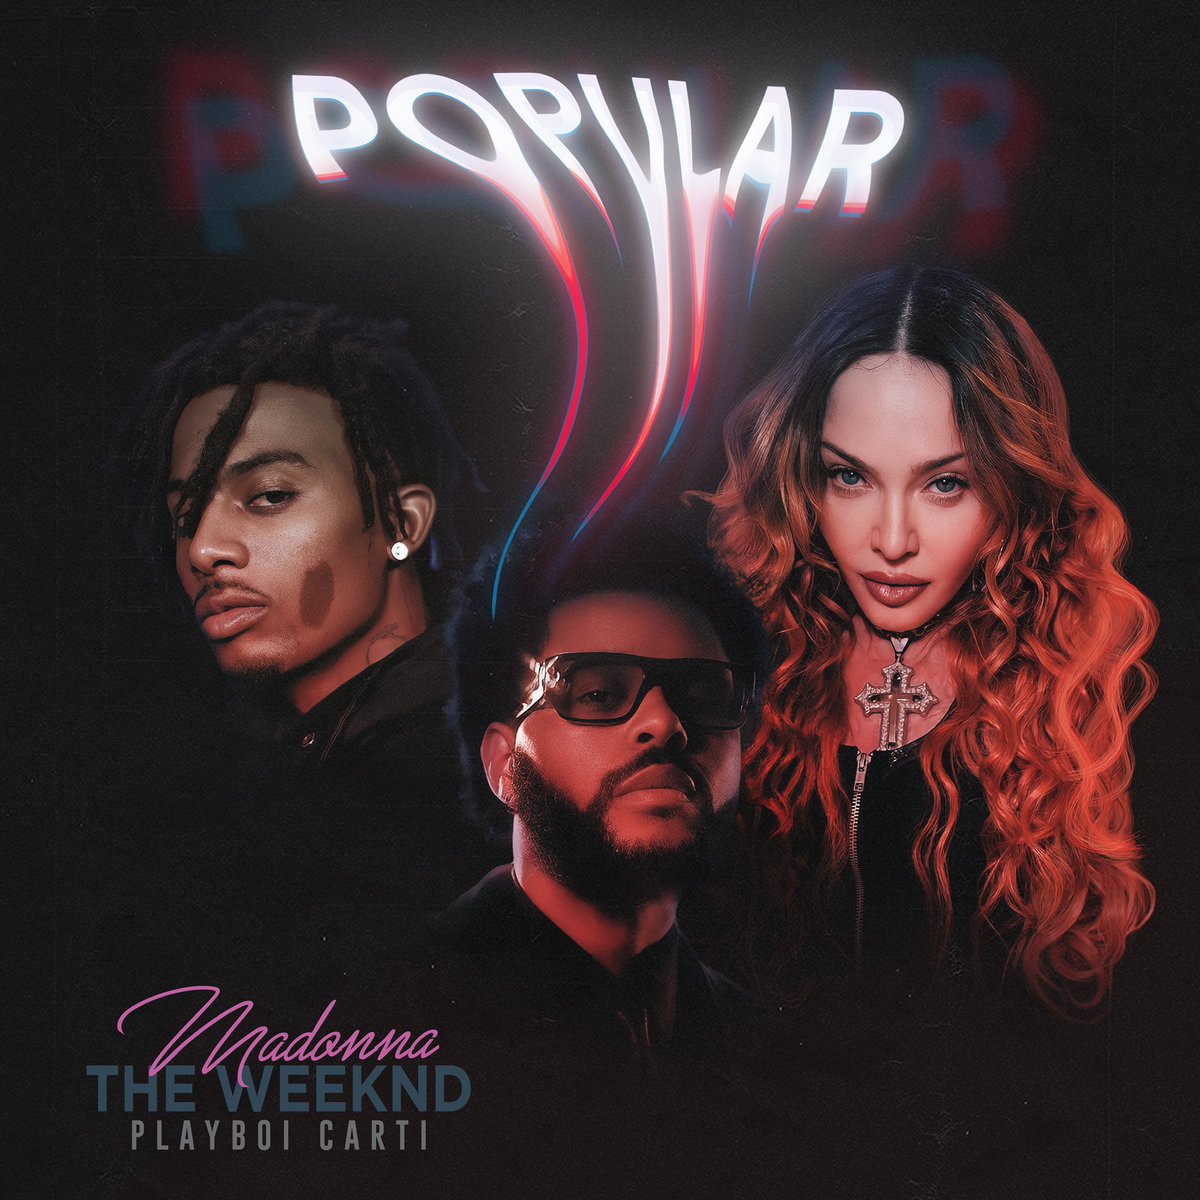 #Popular on official US, UK and Canada charts: 

#BillboardHot100: 
80 (72) 03 Popular (Peaked #43)

#UK: 
#27 (#26) #Popular (Peaked #21)

#Canada: 
28 (29) 03 Popular (Peaked #10) 

Expecting a rebound next week! 
#QueenofPop